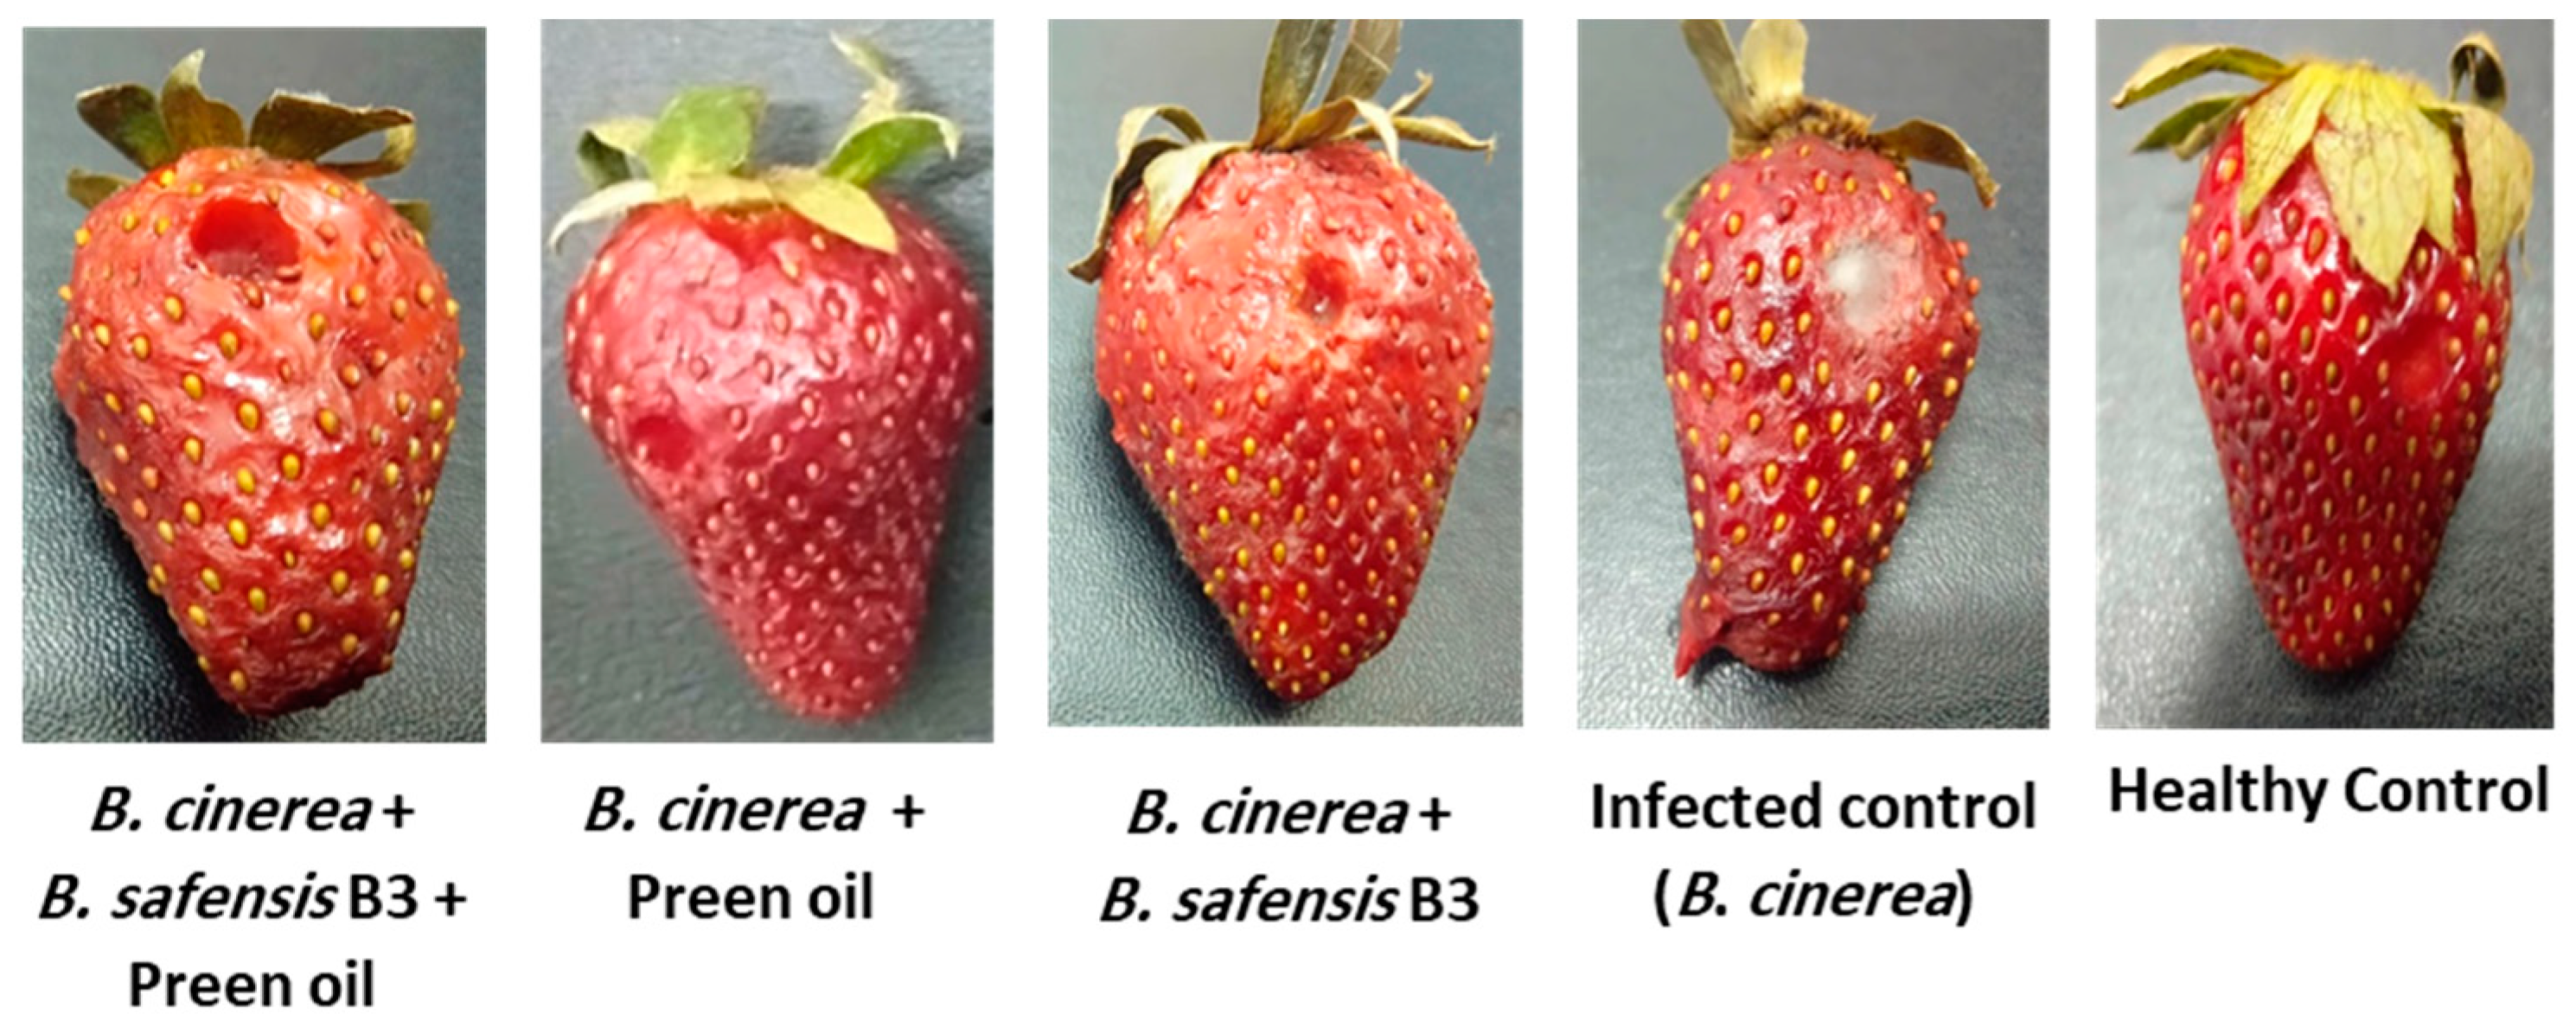 Controlling Strawberry Botrytis Rot: How To Get Rid Of Gray Mold On  Strawberries